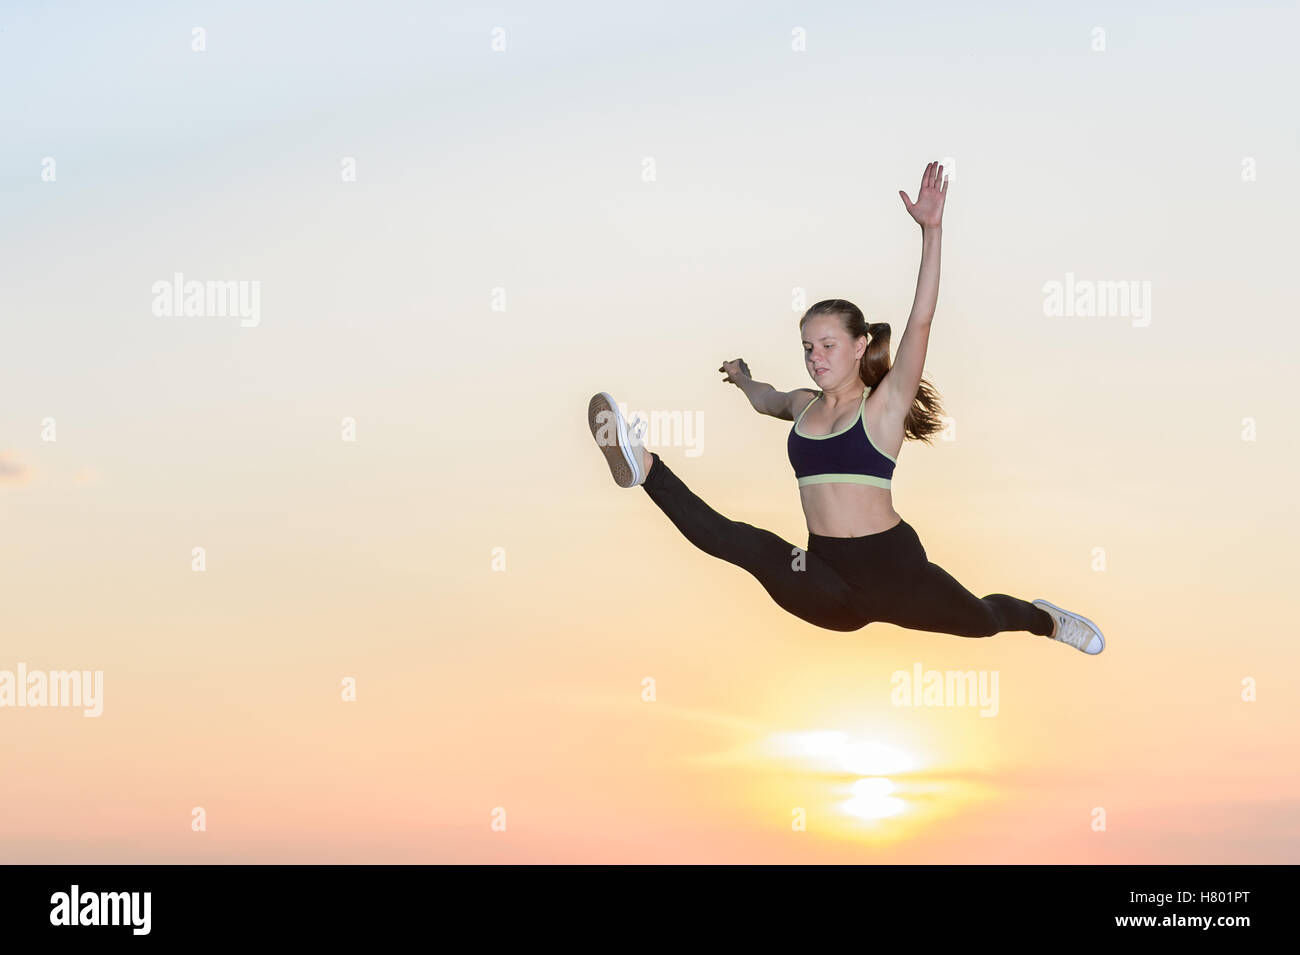 The young girl engaged in artistic gymnastics at sunset background Stock Photo